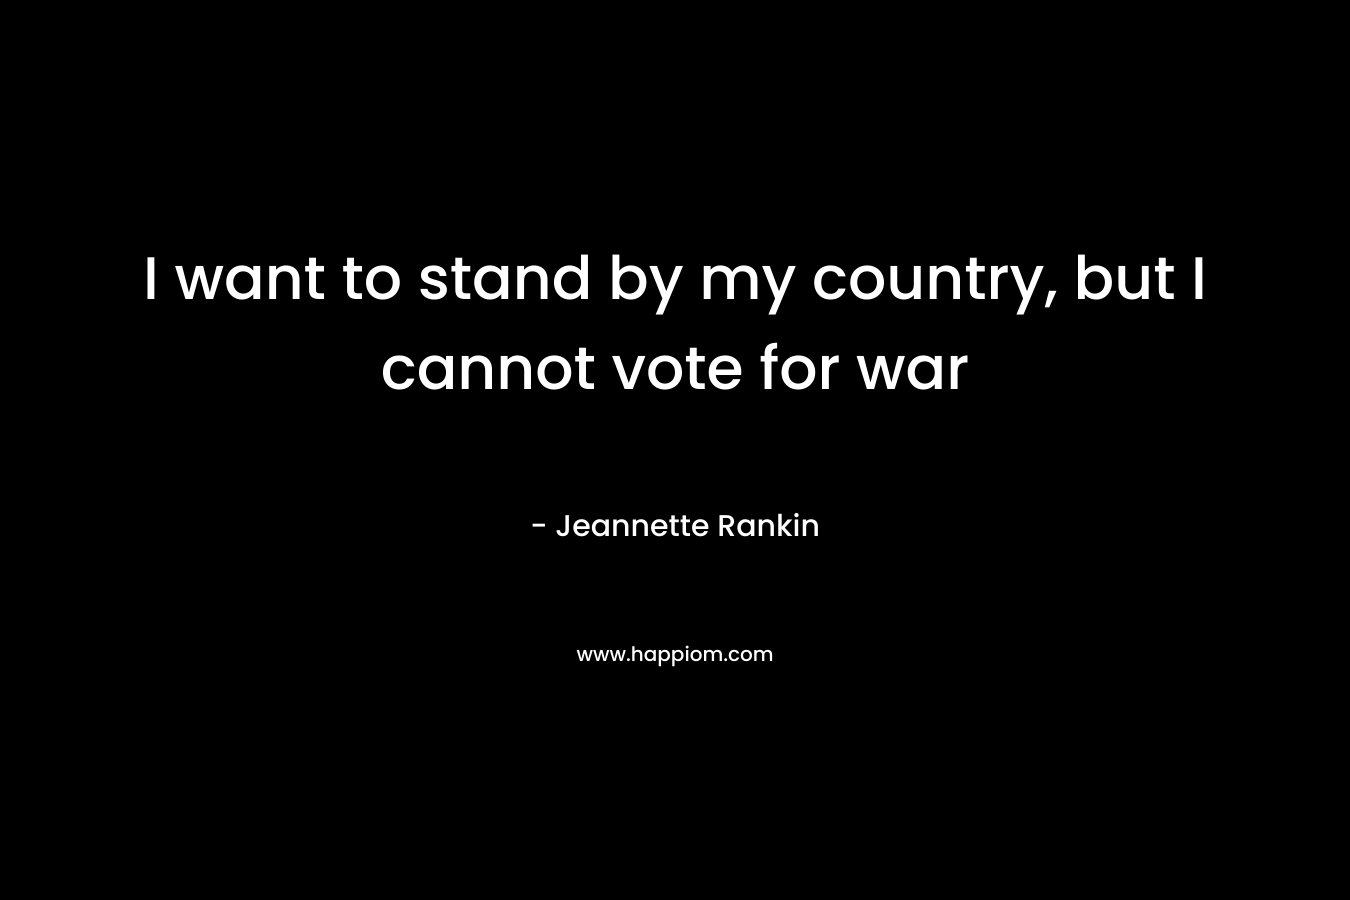 I want to stand by my country, but I cannot vote for war